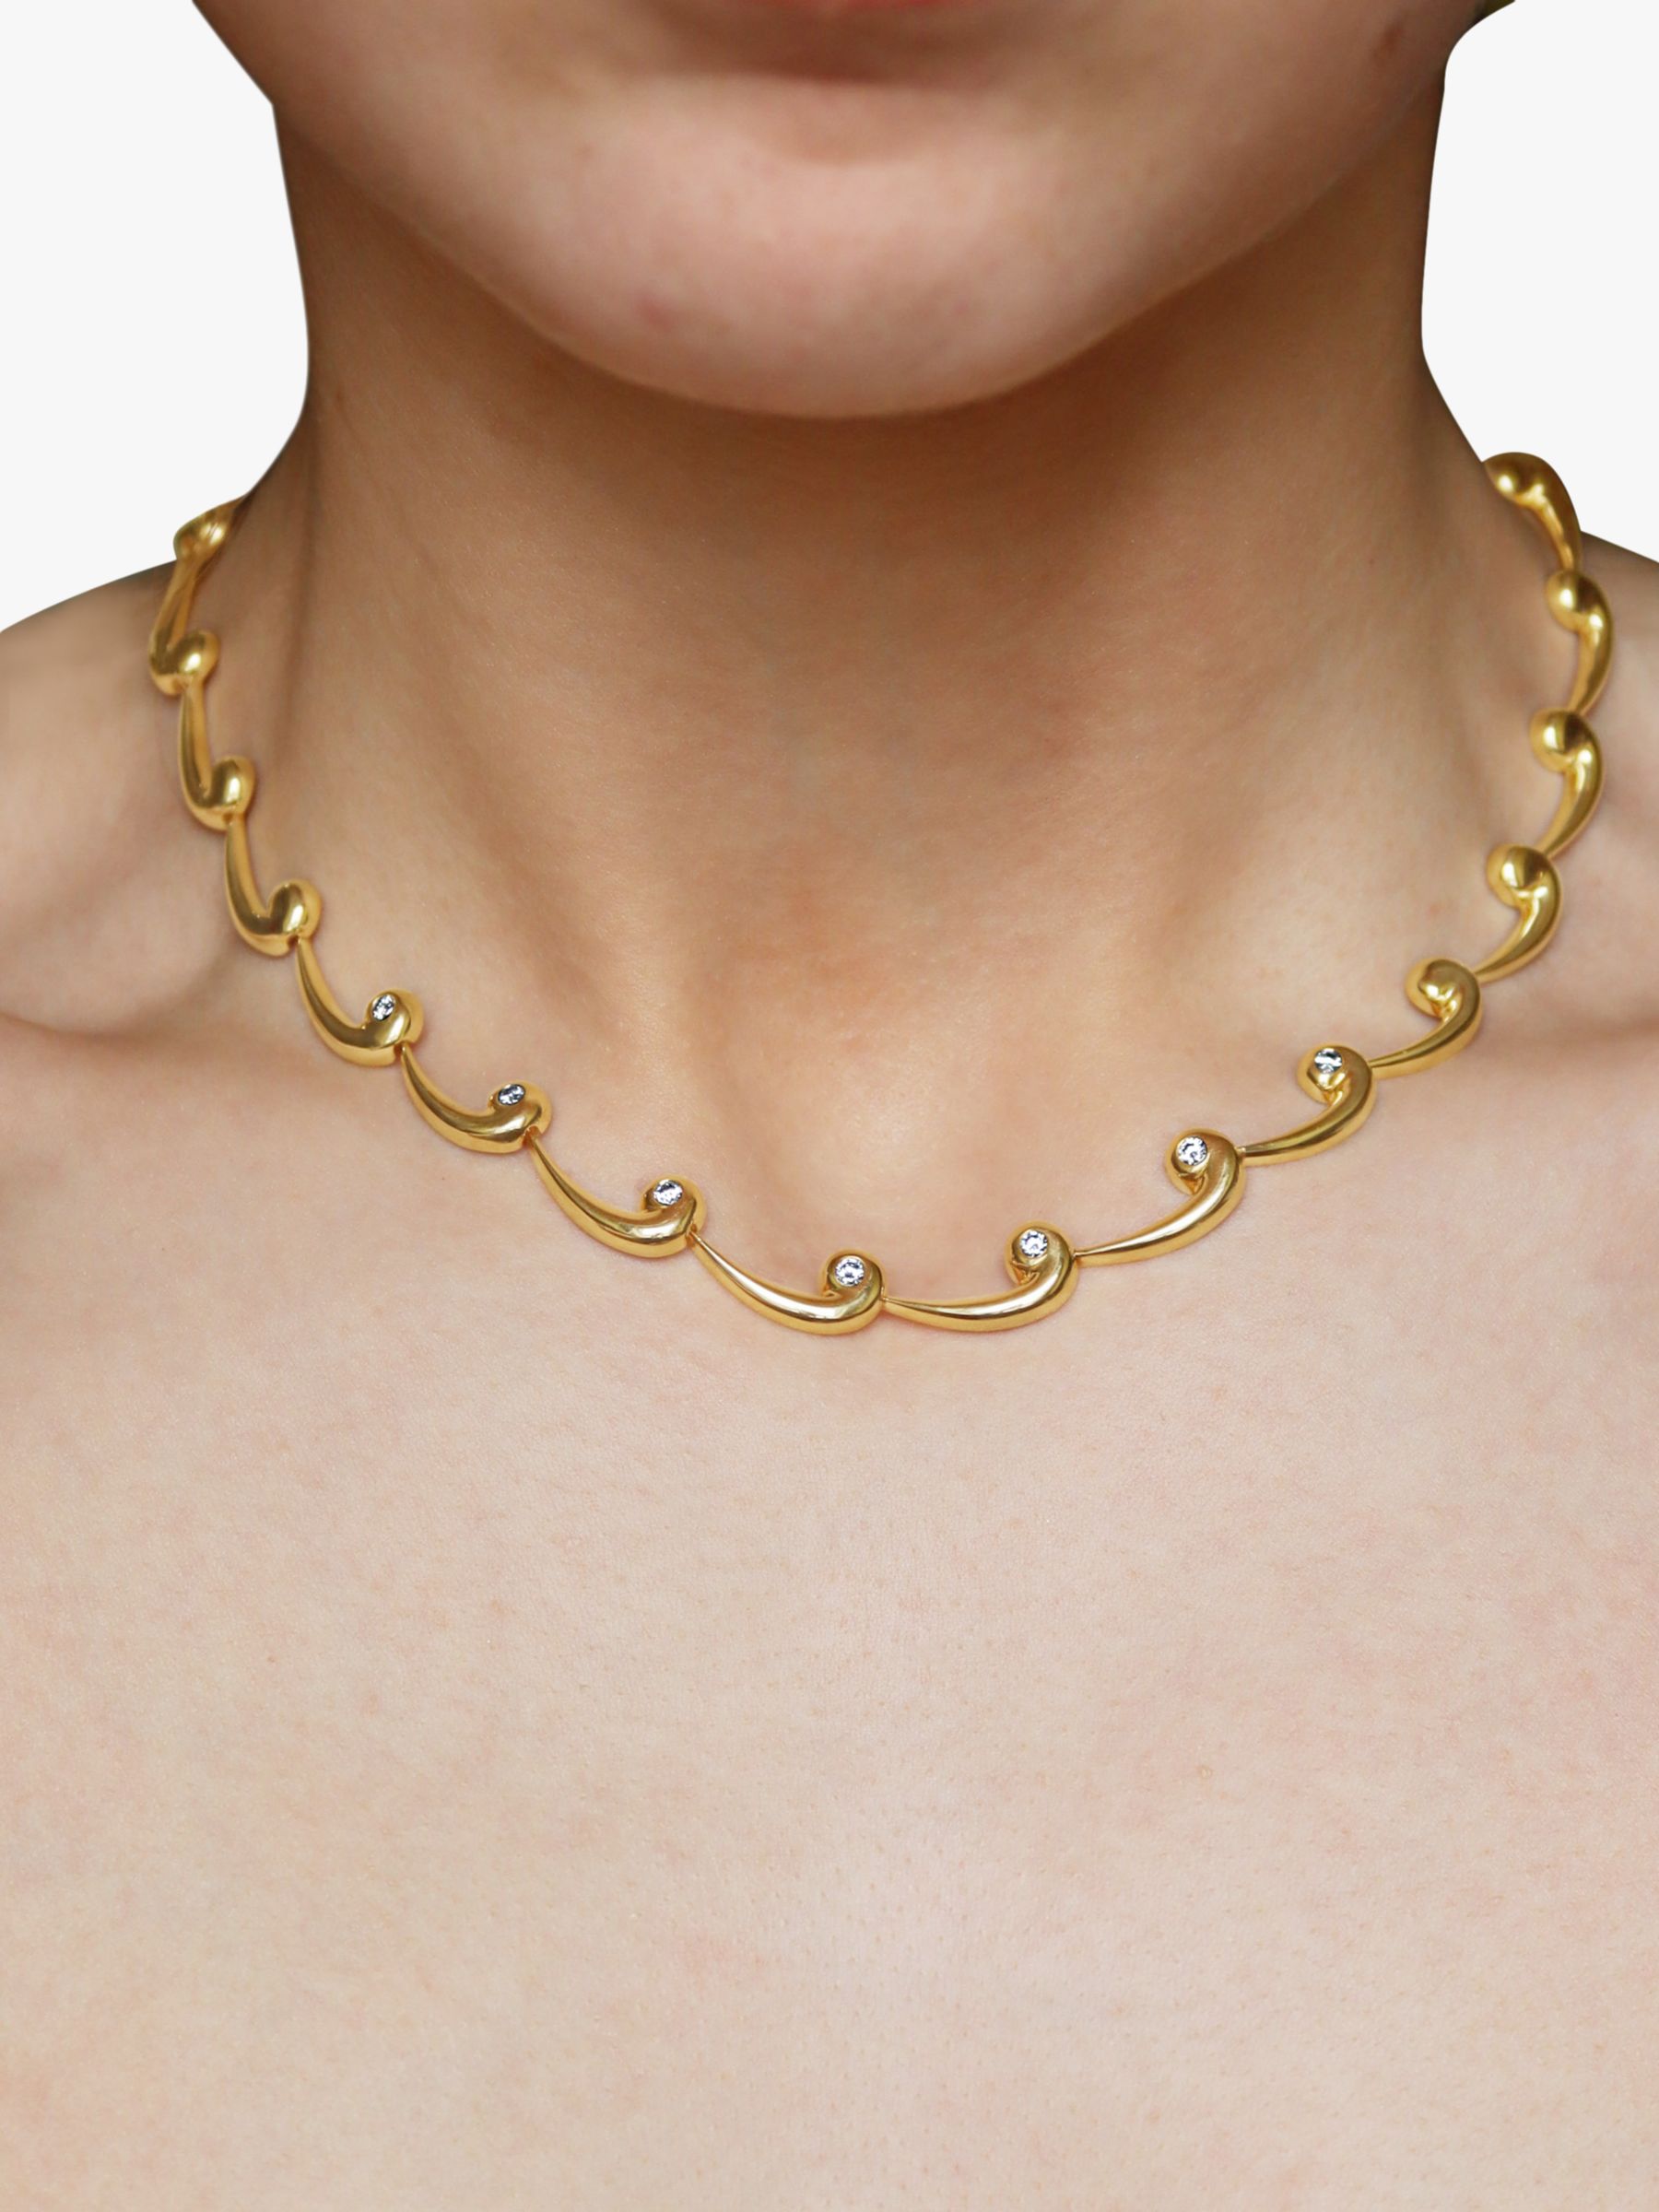 Buy Milton & Humble Jewellery Second Hand 9ct Yellow Gold Diamond Link Necklace, Dated 1998 Online at johnlewis.com